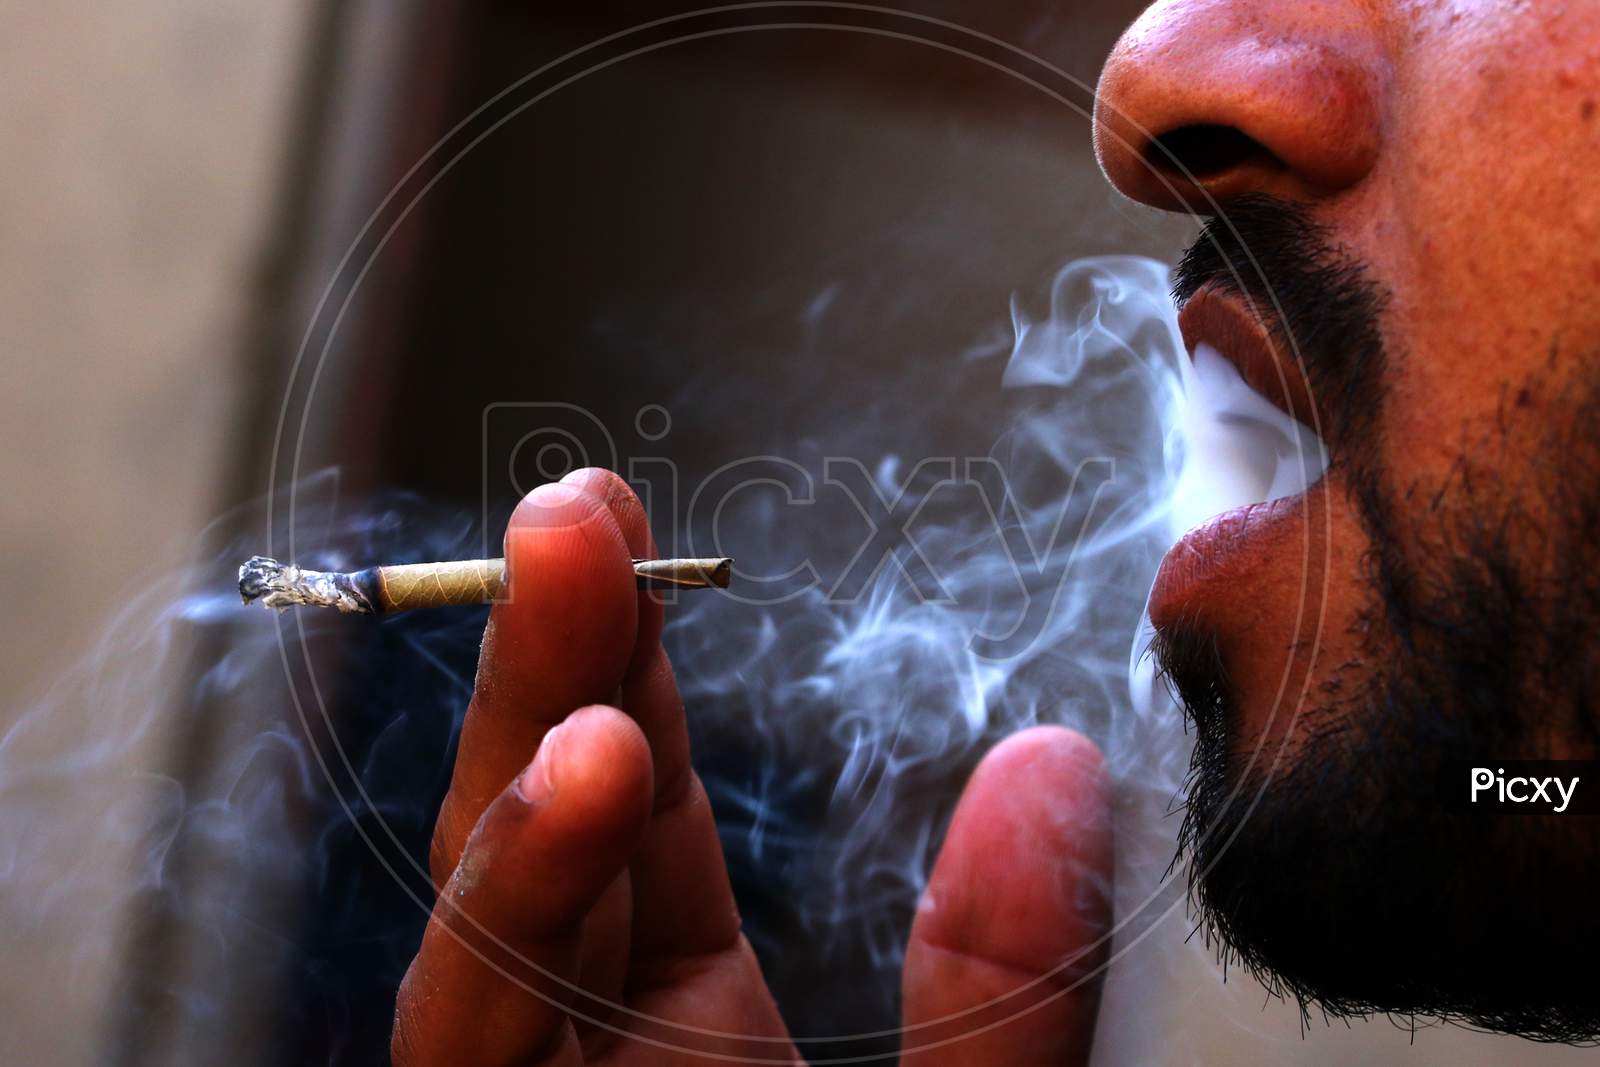 A Man Smokes 'Bidi' A Small Hand Rolled Cigarette On World No Tobacco Day In Ajmer, Rajathan, India On May 31, 2020.